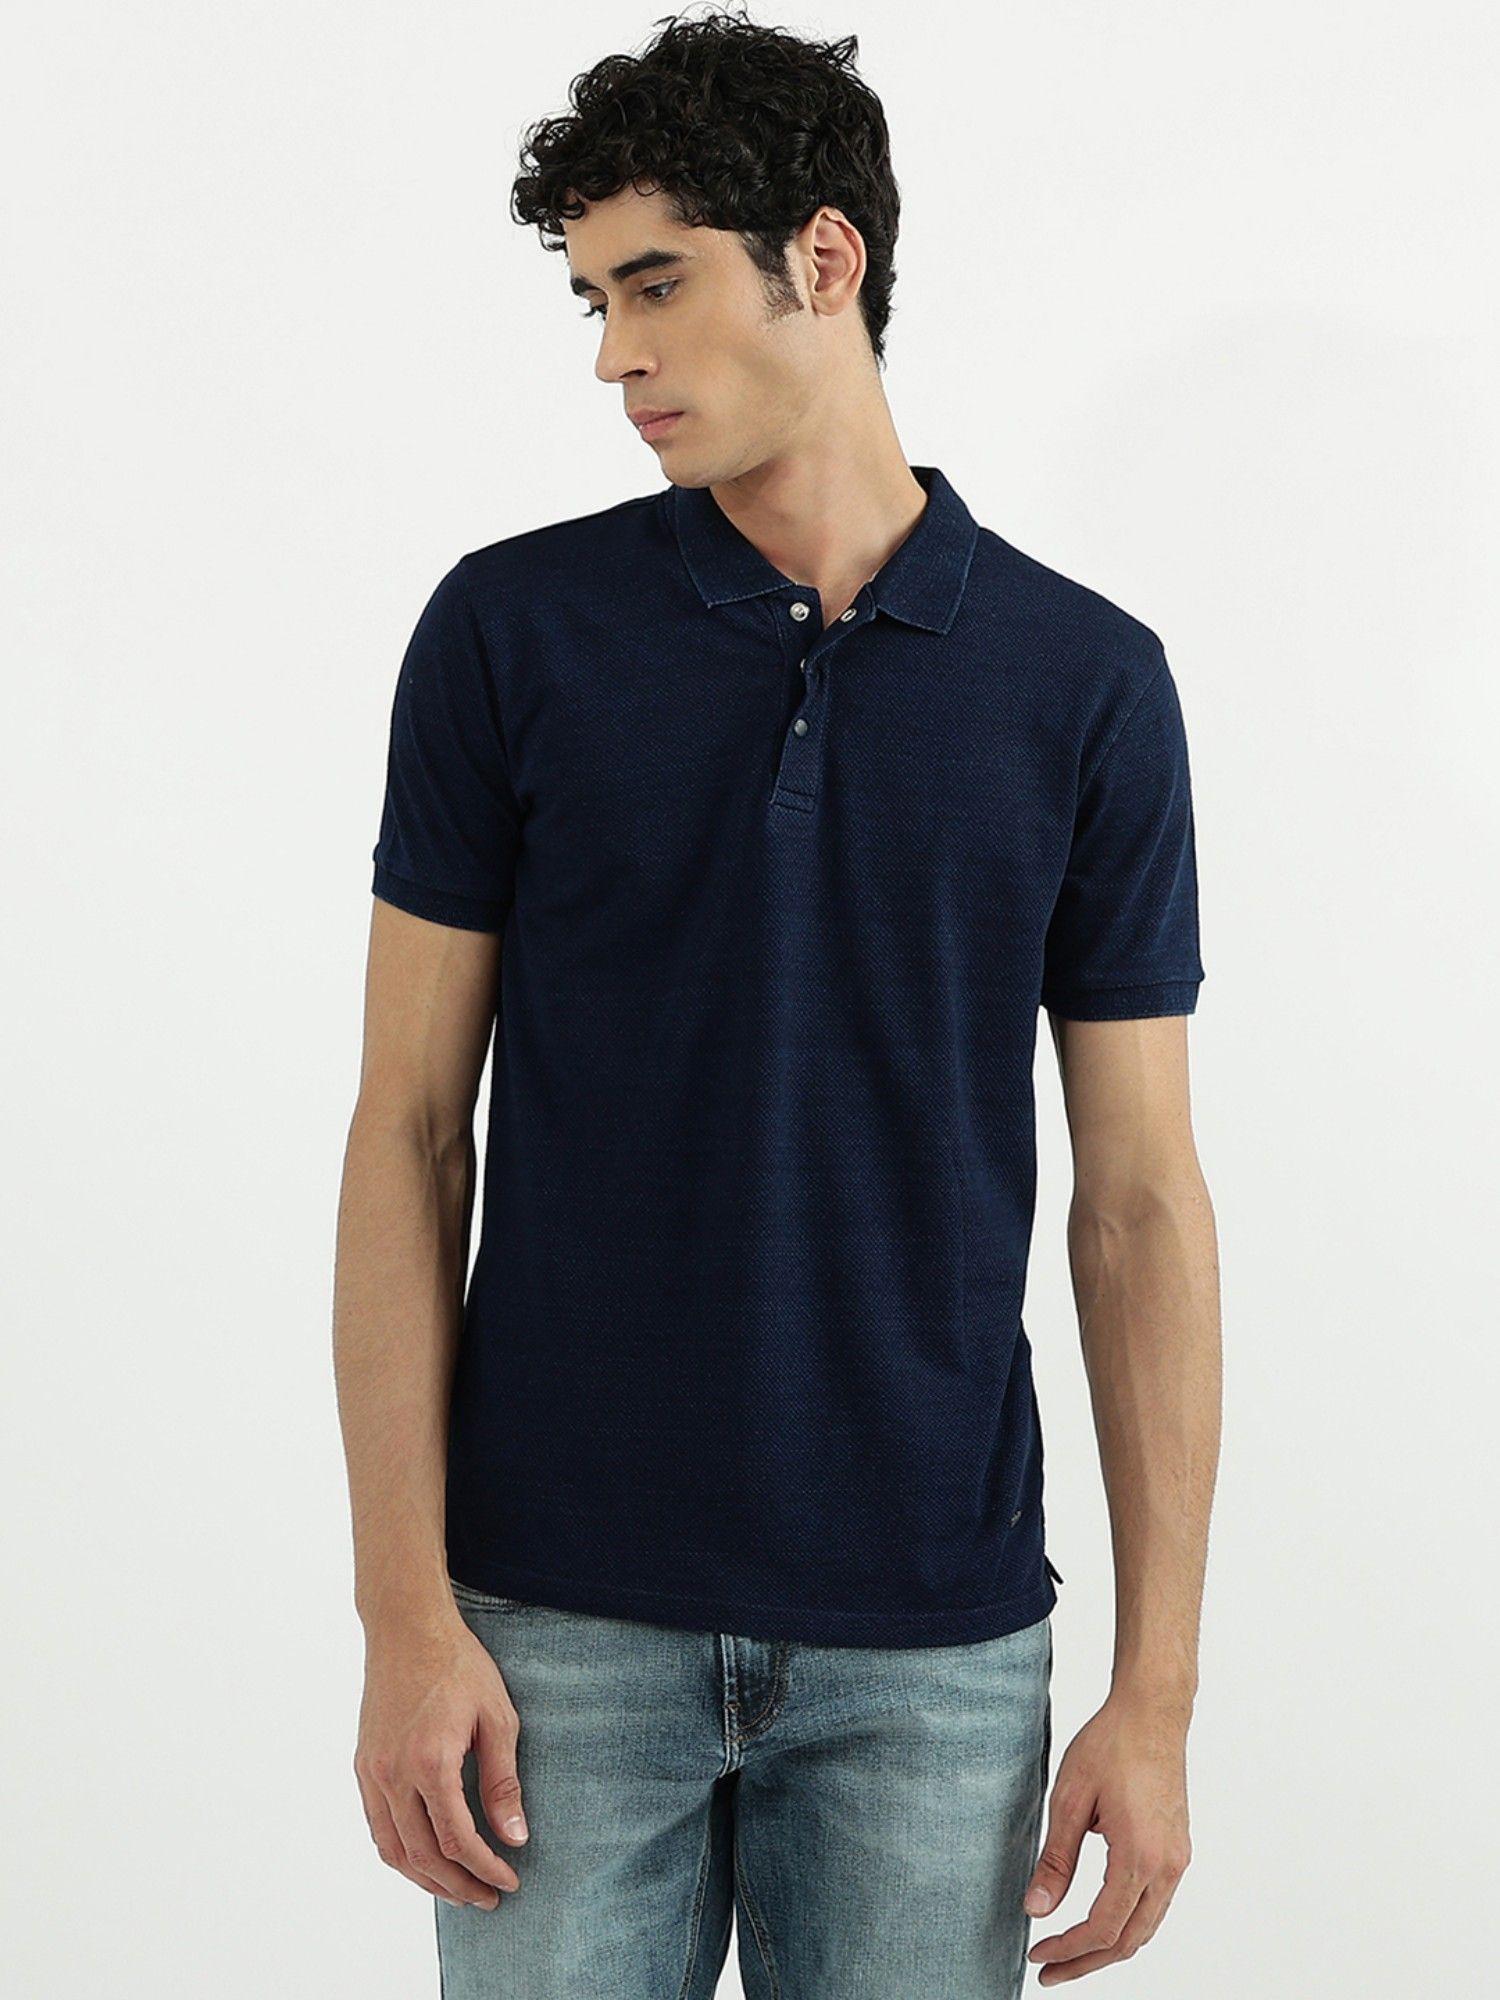 men-solid-polo-t-shirt-navy-blue